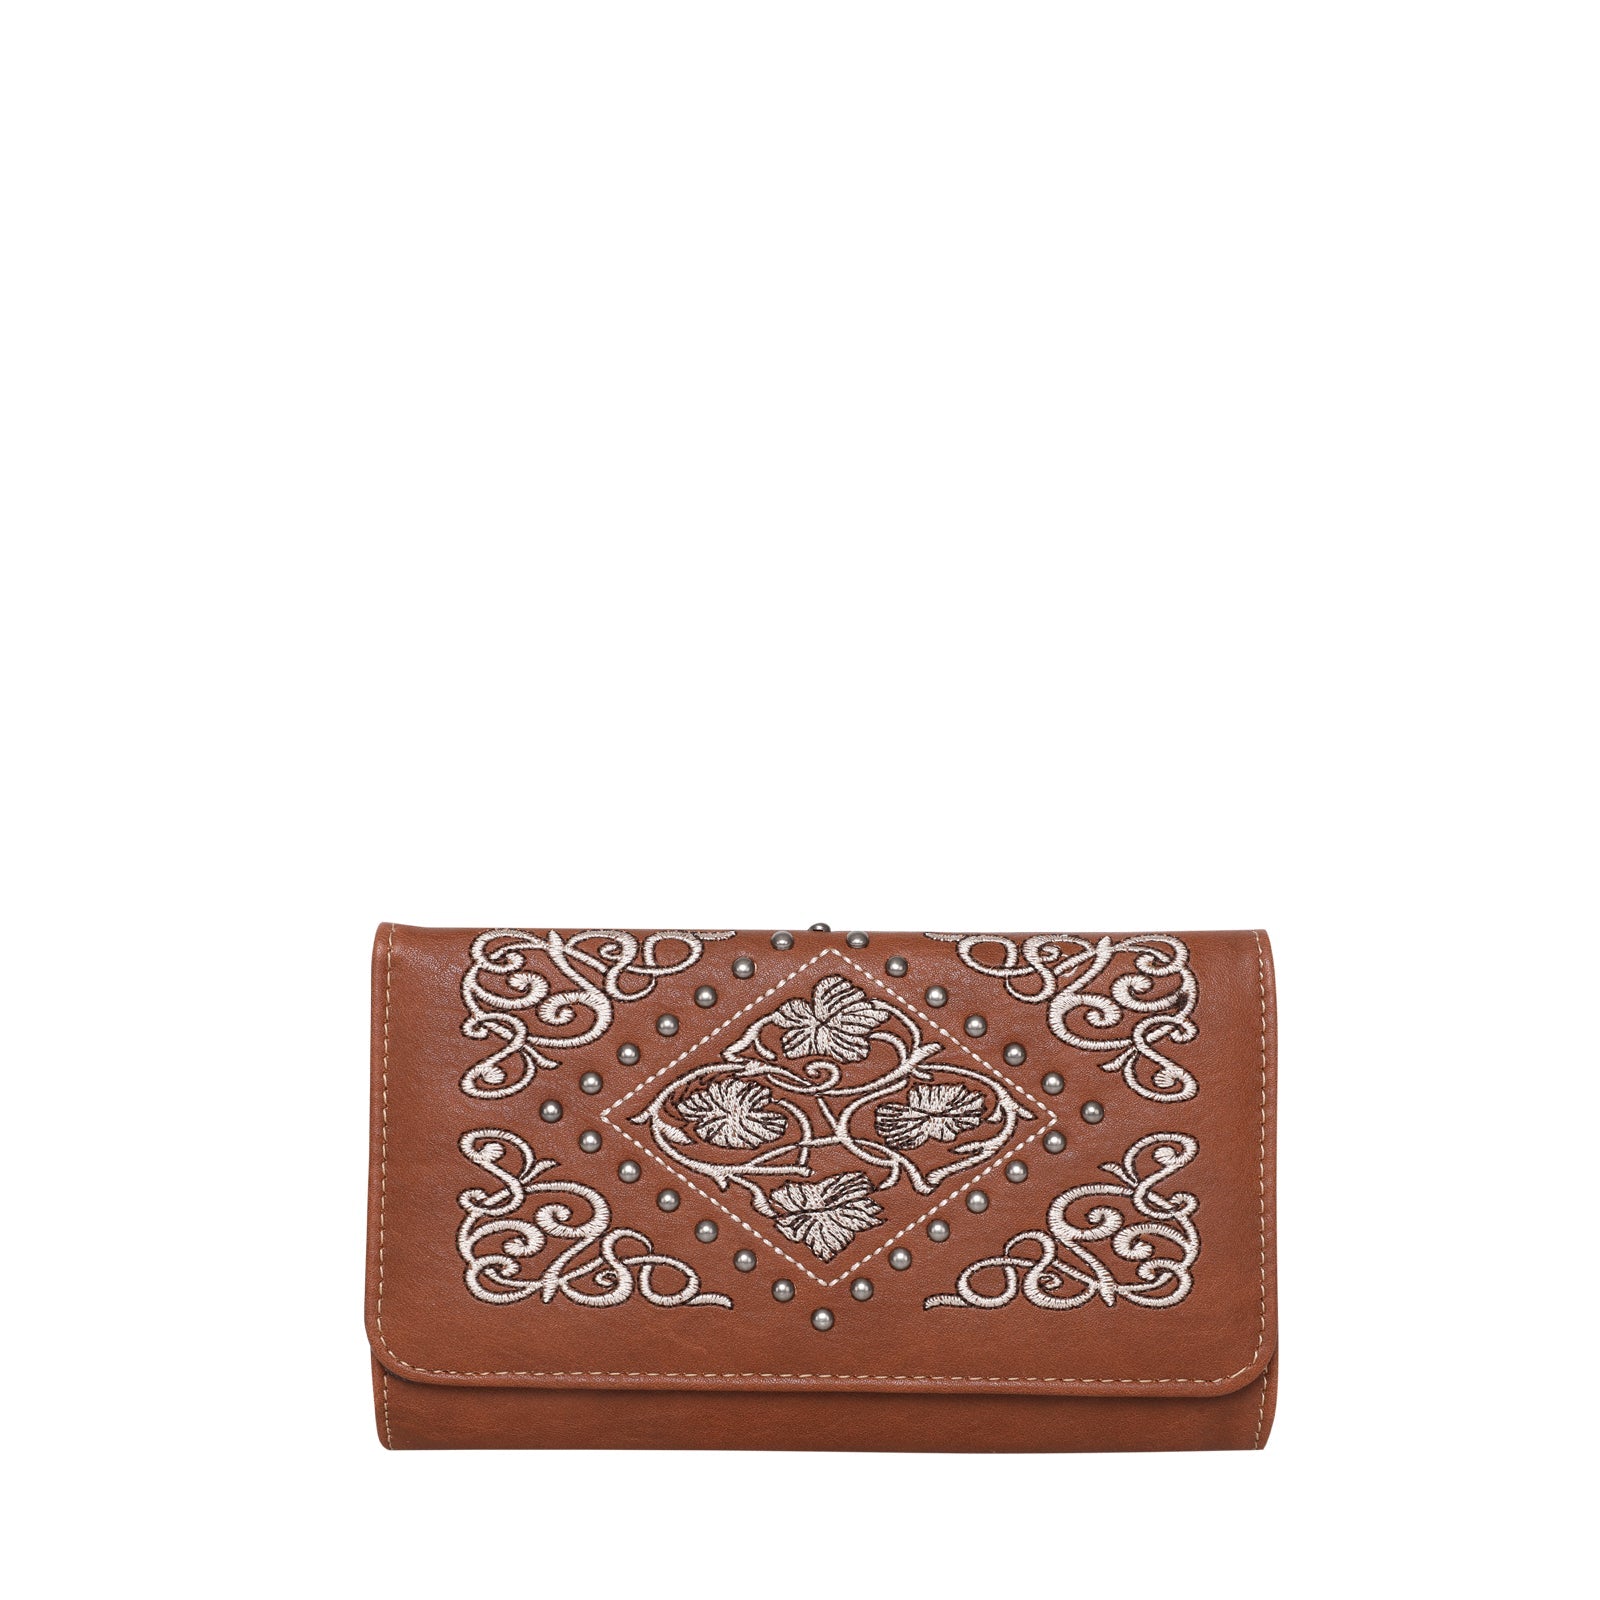 Brownn Studded Embroidery Floral Western Wallet by American Bling - Cowgirl Wear